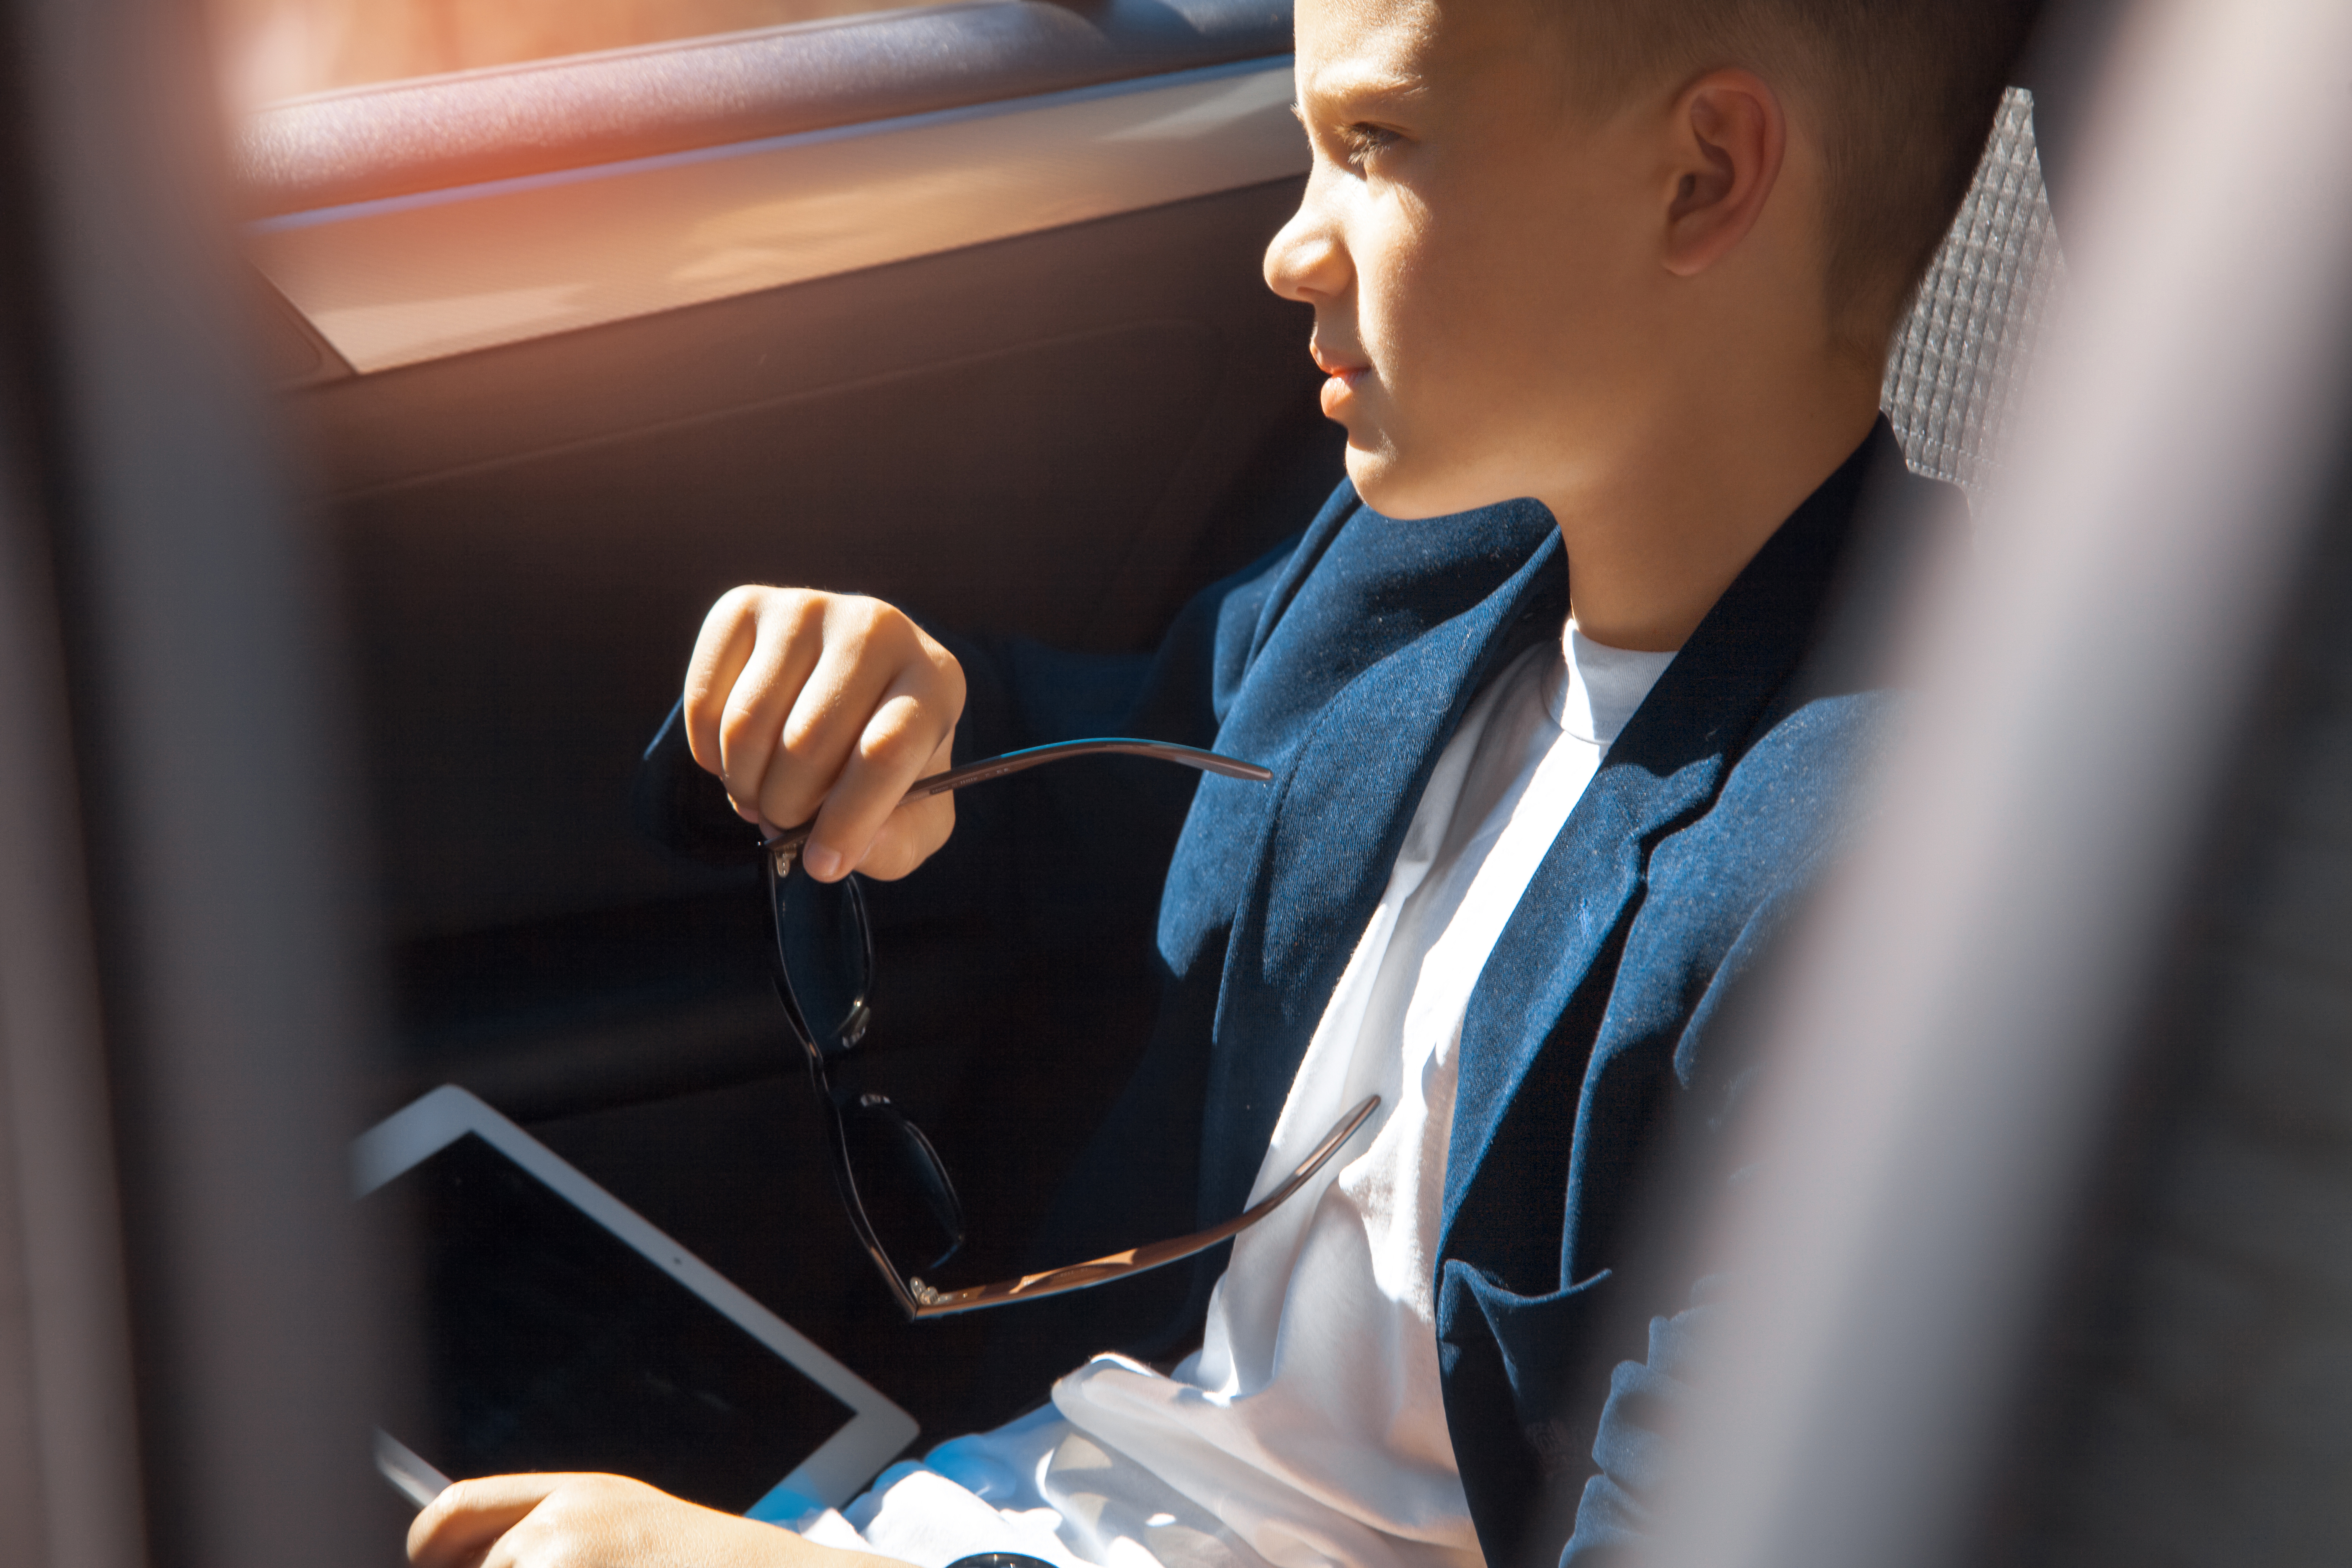 Young rich boy sits on a backseat of car. | Source: Shutterstock